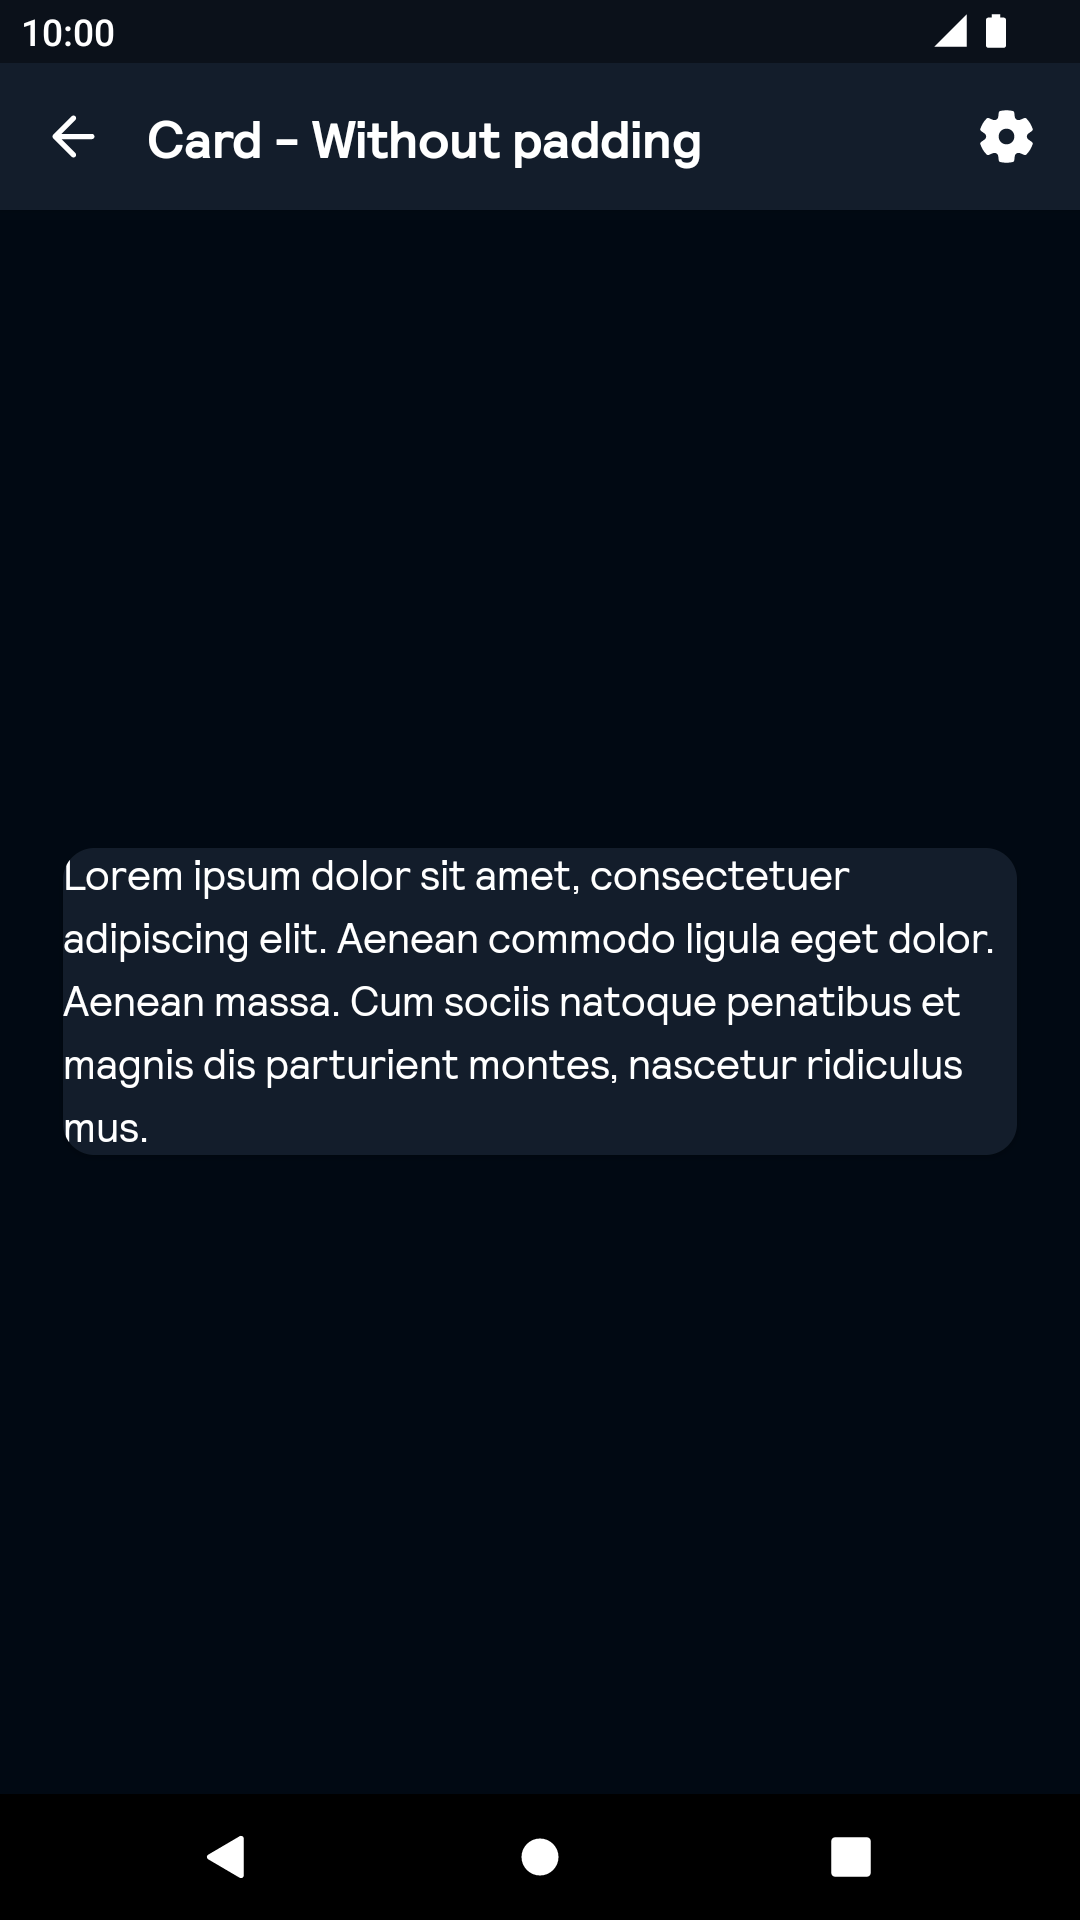 Without padding Card component - dark mode